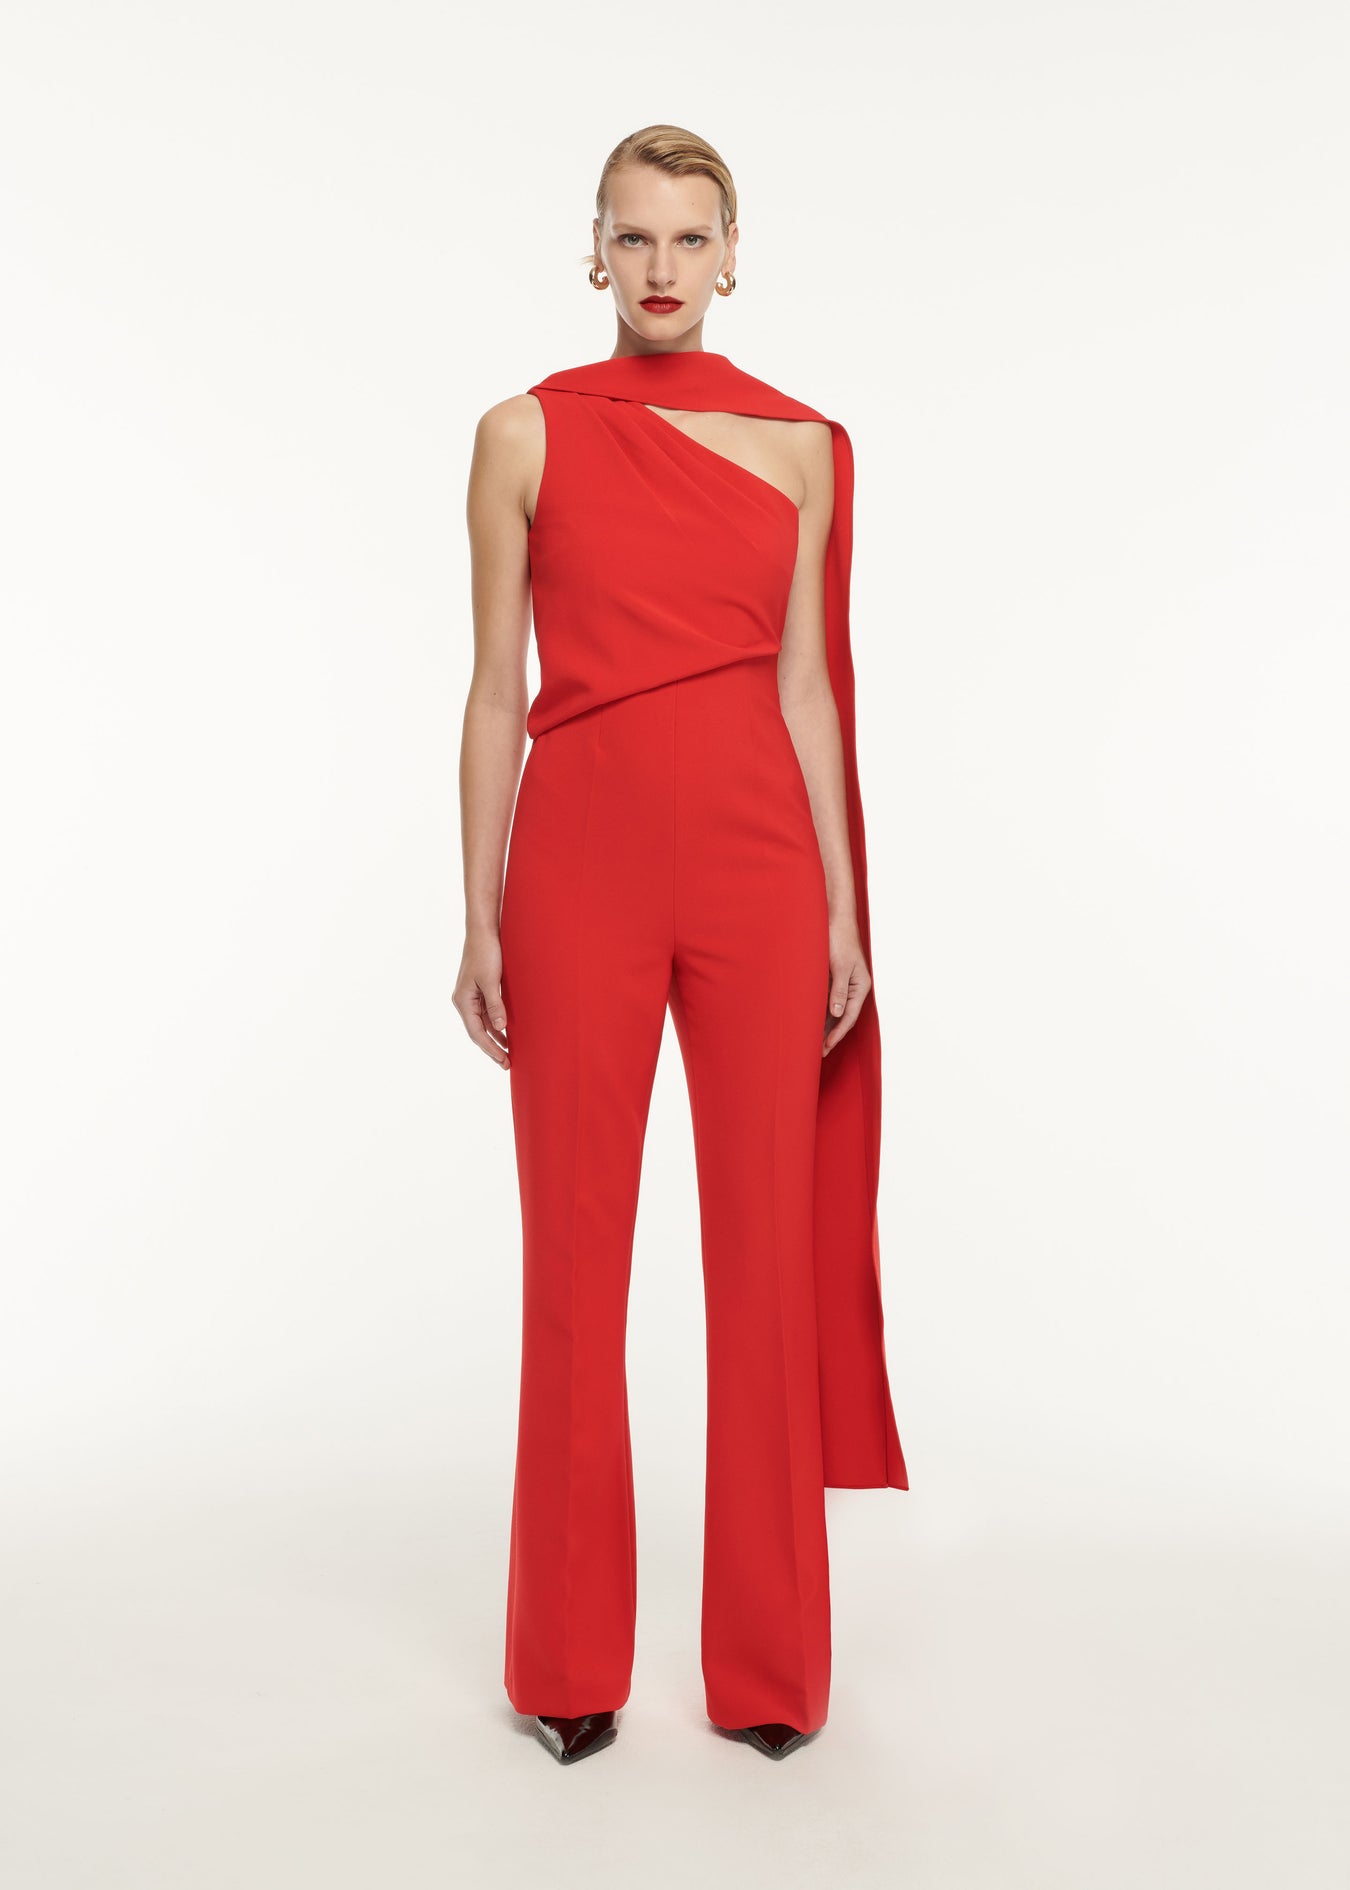 A woman wearing the Asymmetric Crepe Jumpsuit in Red